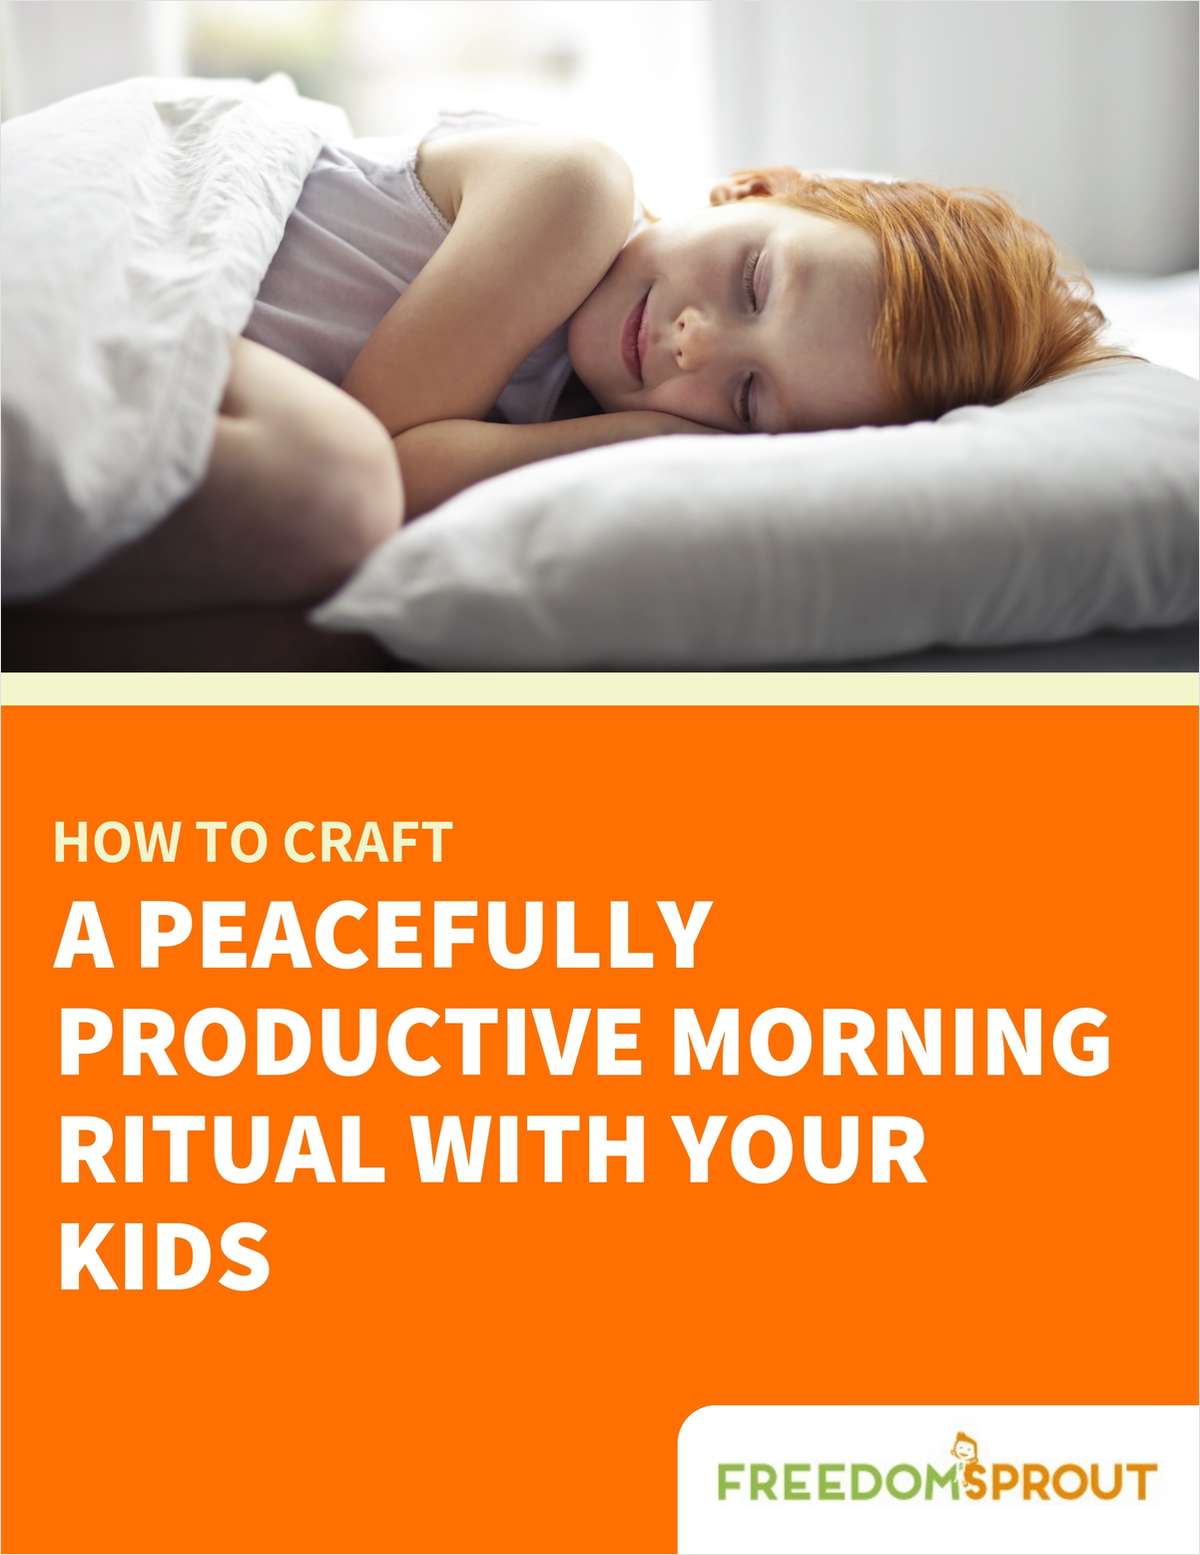 How to Craft a Peacefully Productive Morning Ritual With Your Kids